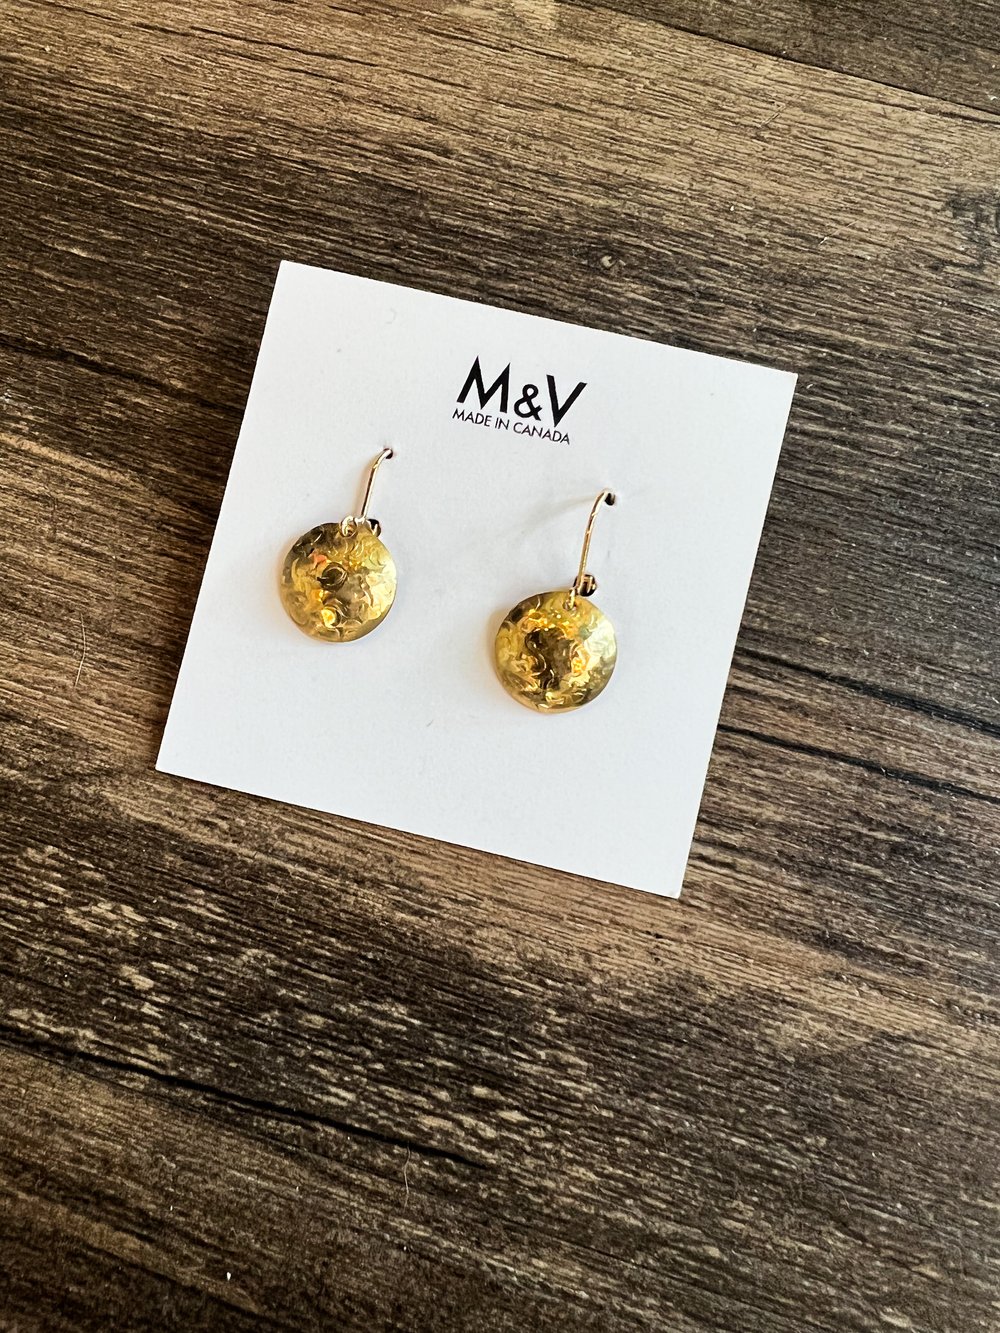 M & V Made In Canada - Earrings — The Handpicked Home | Shop Local In White  Rock